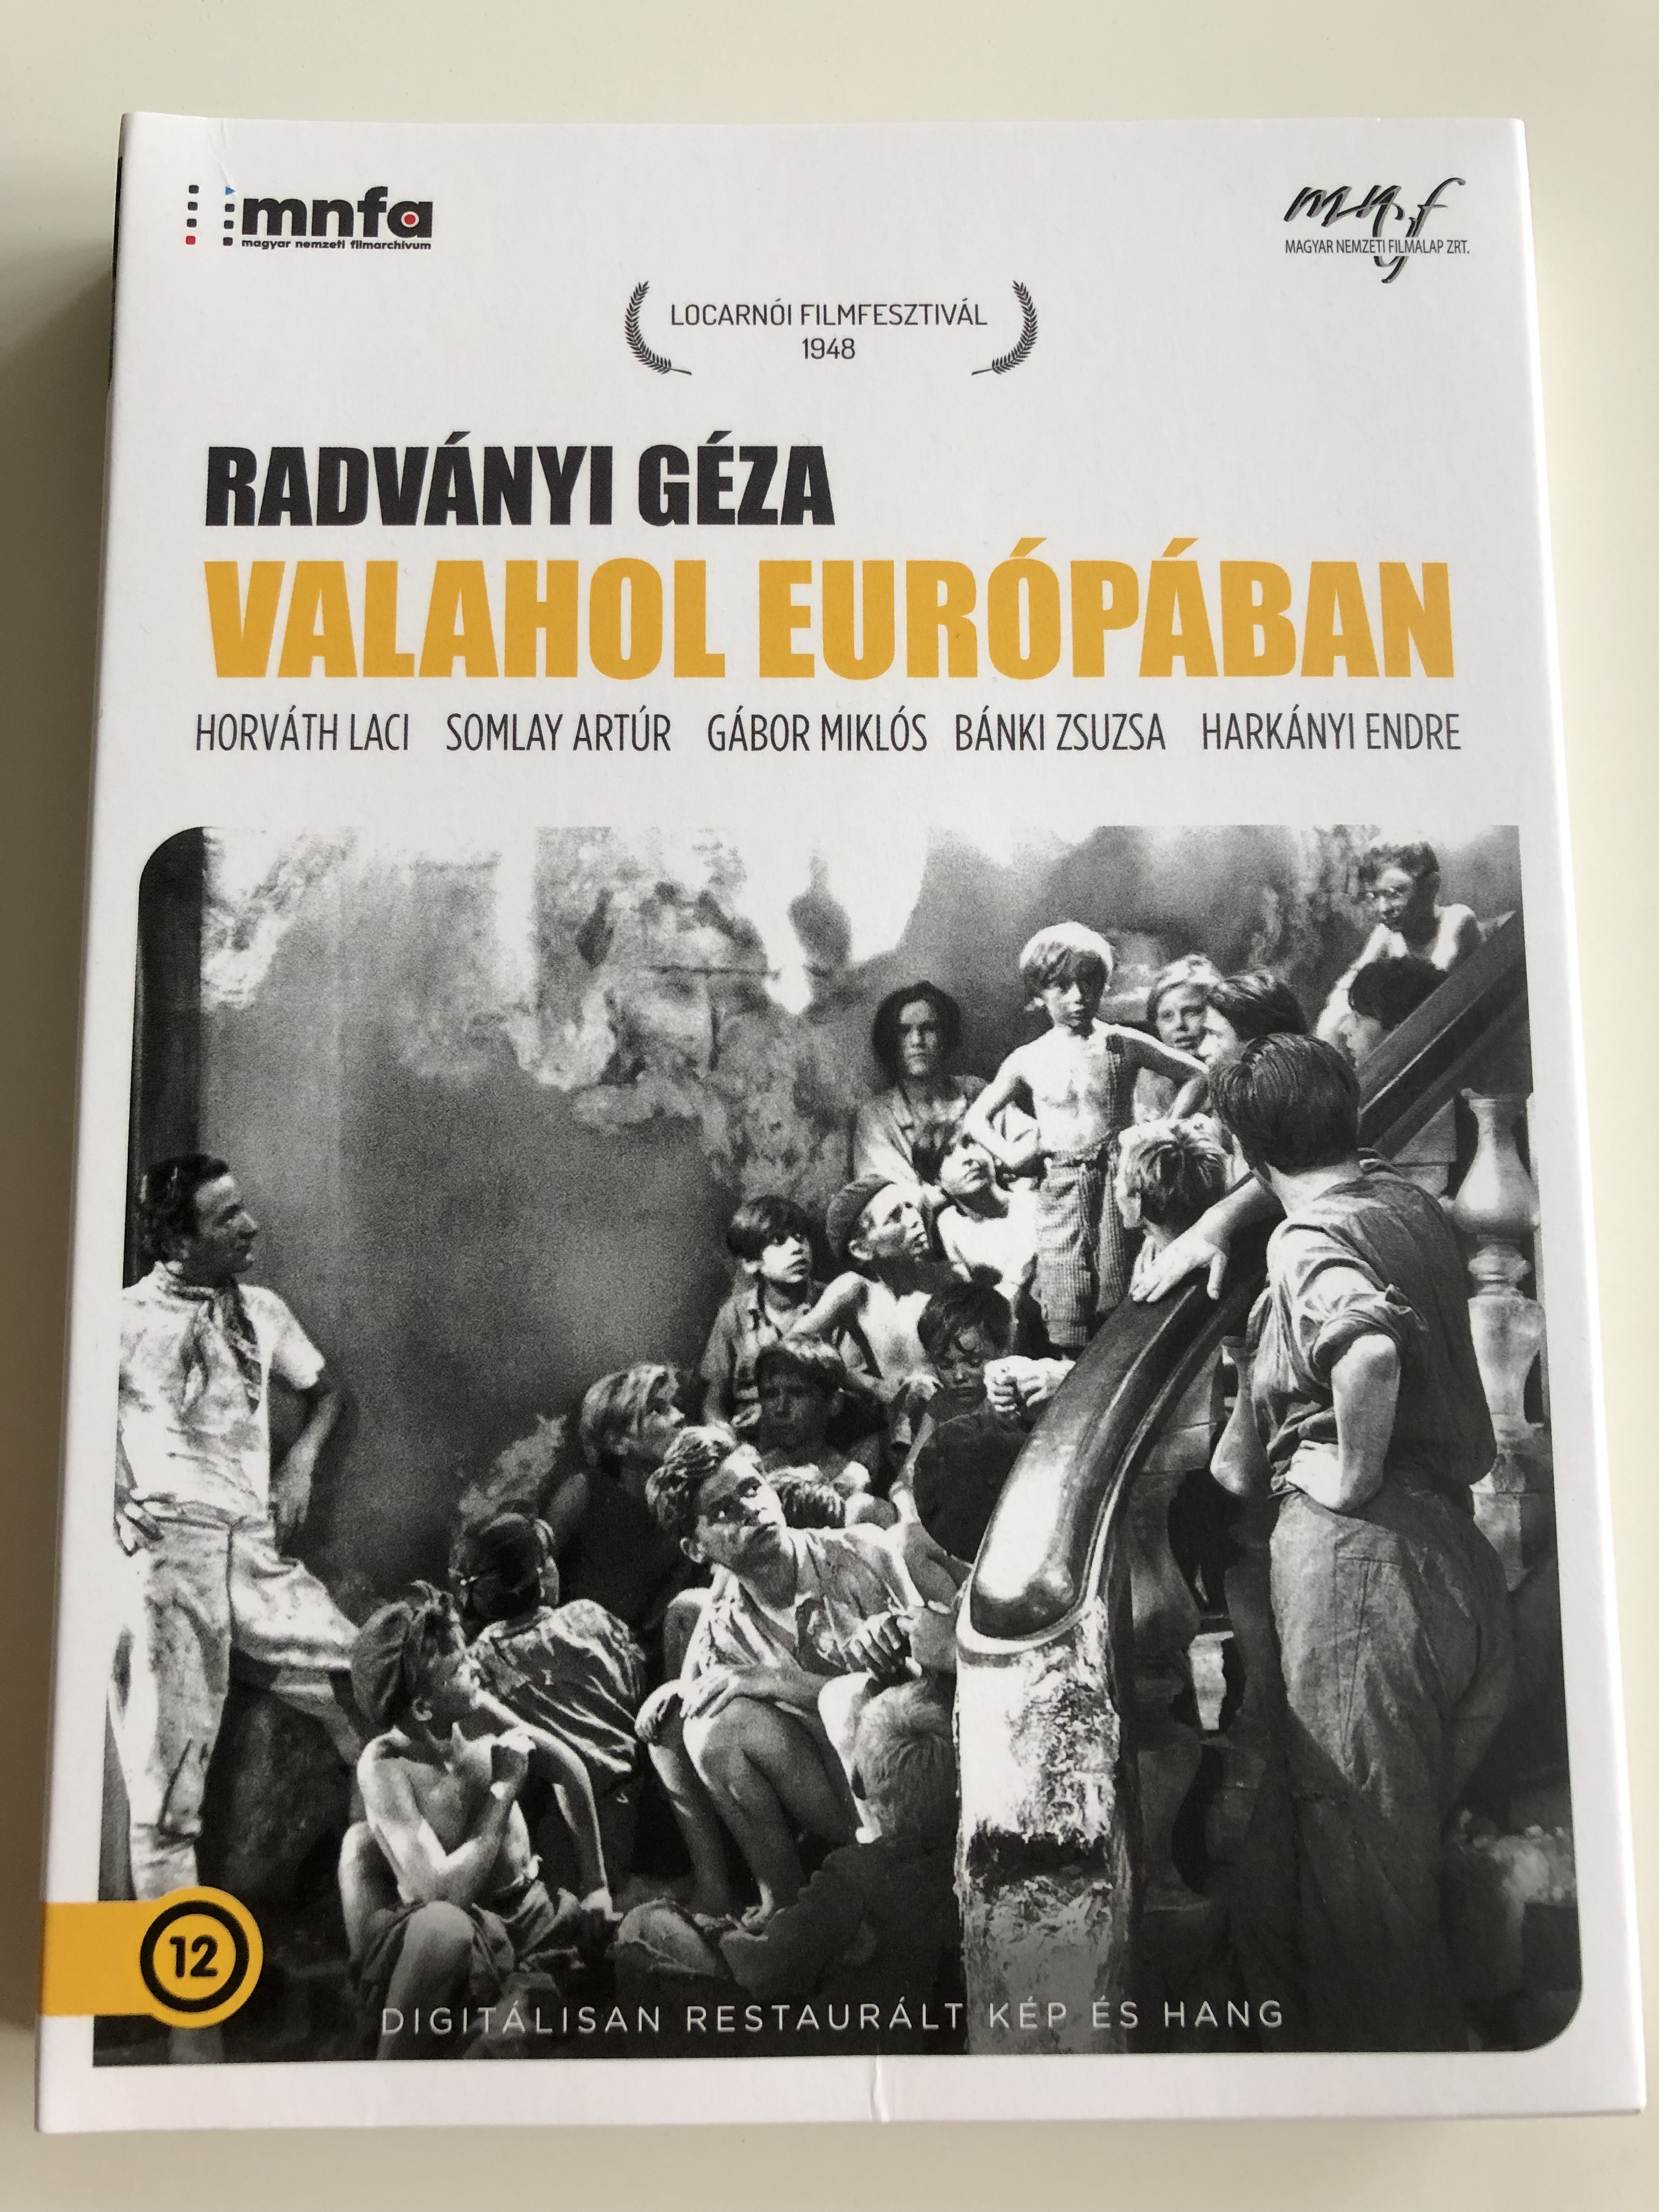 valahol-eur-p-ban-dvd-set-1947-directed-by-radv-nyi-g-za-starring-art-r-somlay-mikl-s-g-bor-extra-collector-s-edition-2-dvd-biography-of-g-za-radv-nyi-behind-the-scenes-of-restoring-the-film-1-.jpg